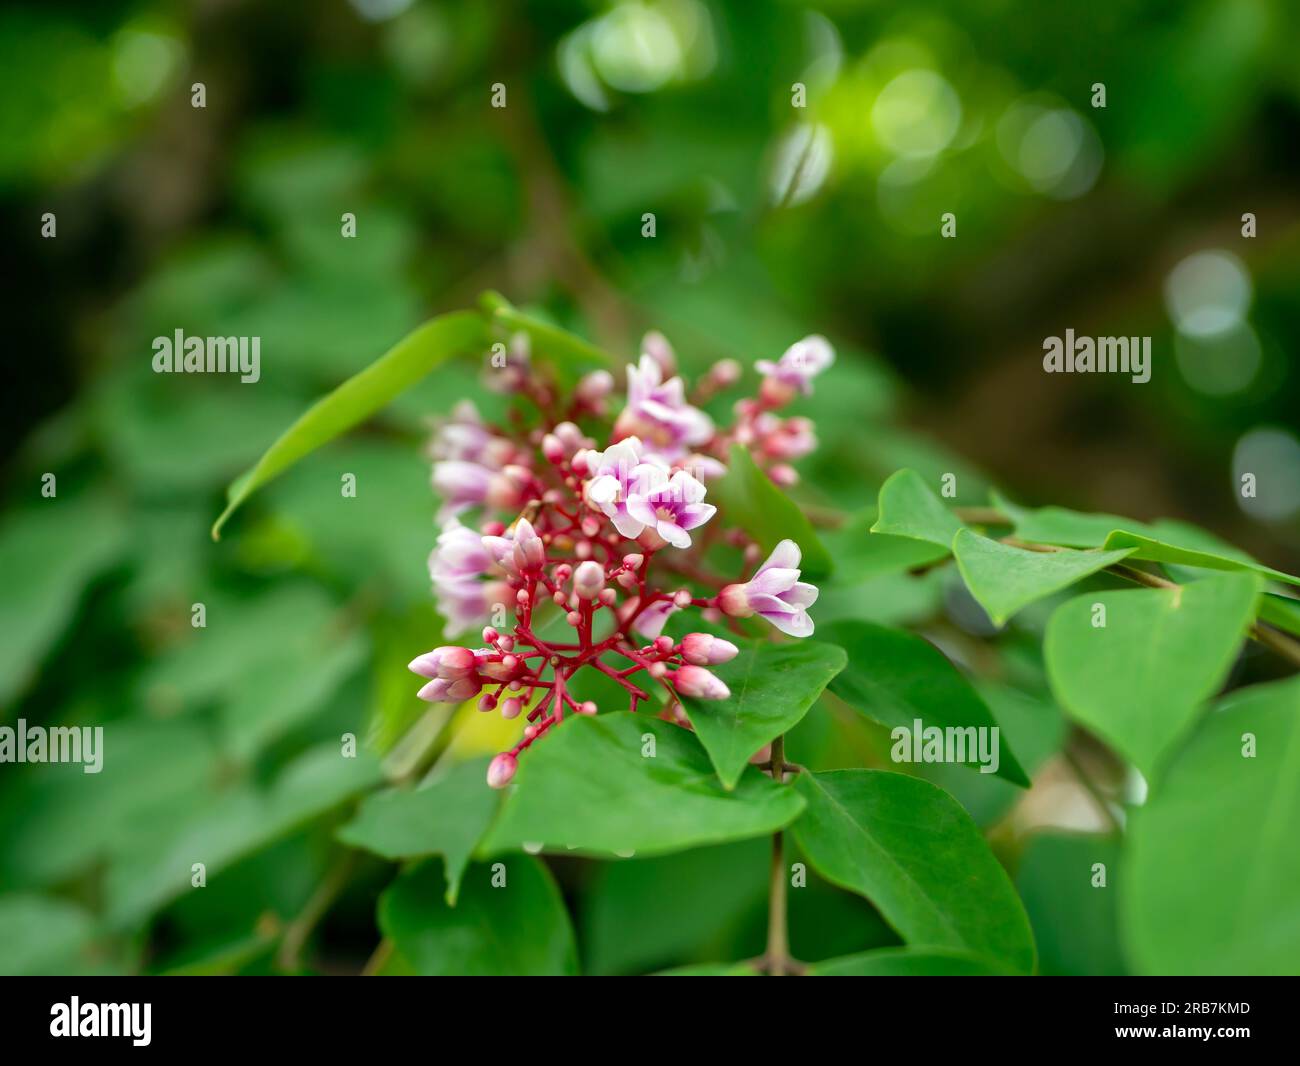 Star fruit (Averrhoa carambola) flowers and green leaves on its tree. Natural background Stock Photo